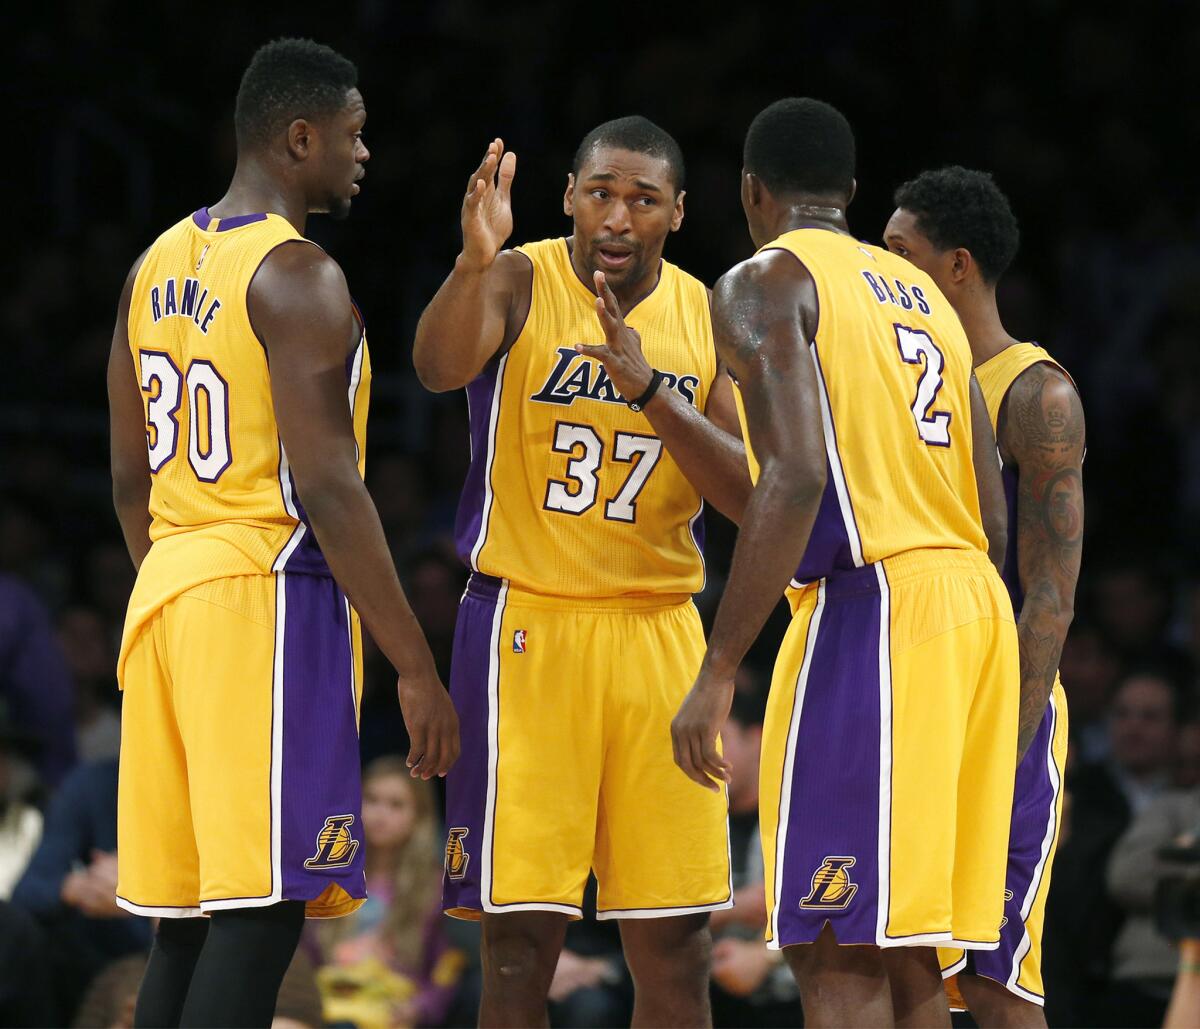 Metta World Peace (37) instructs his Lakers teammates Julius Randle (30), Louis Williams (23) and Brandon Bass (2) during the first half of a game against the Warriors on Jan. 5.